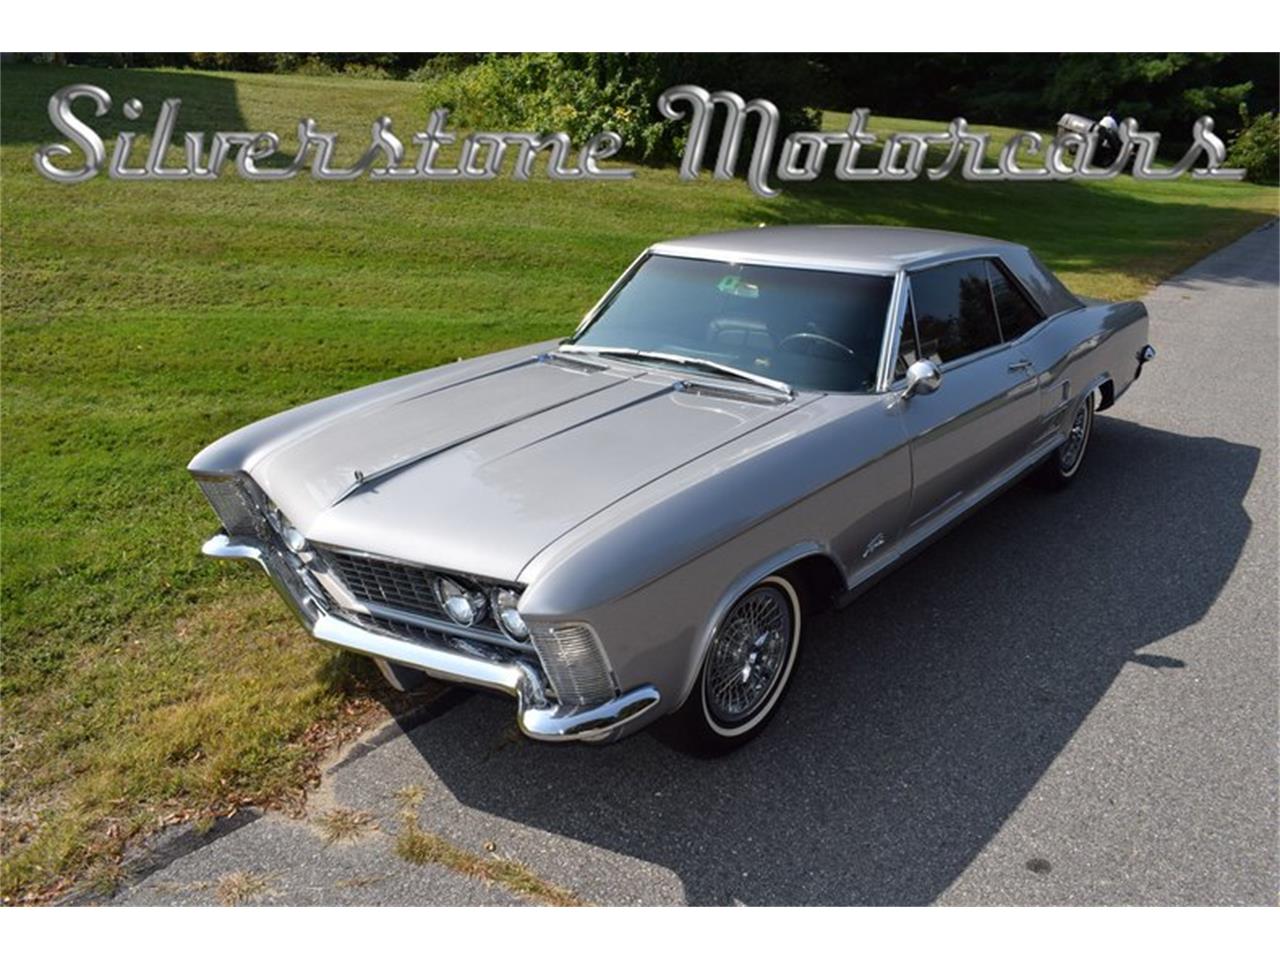 1964 buick riviera for sale classiccars com cc 1024925 1964 buick riviera for sale